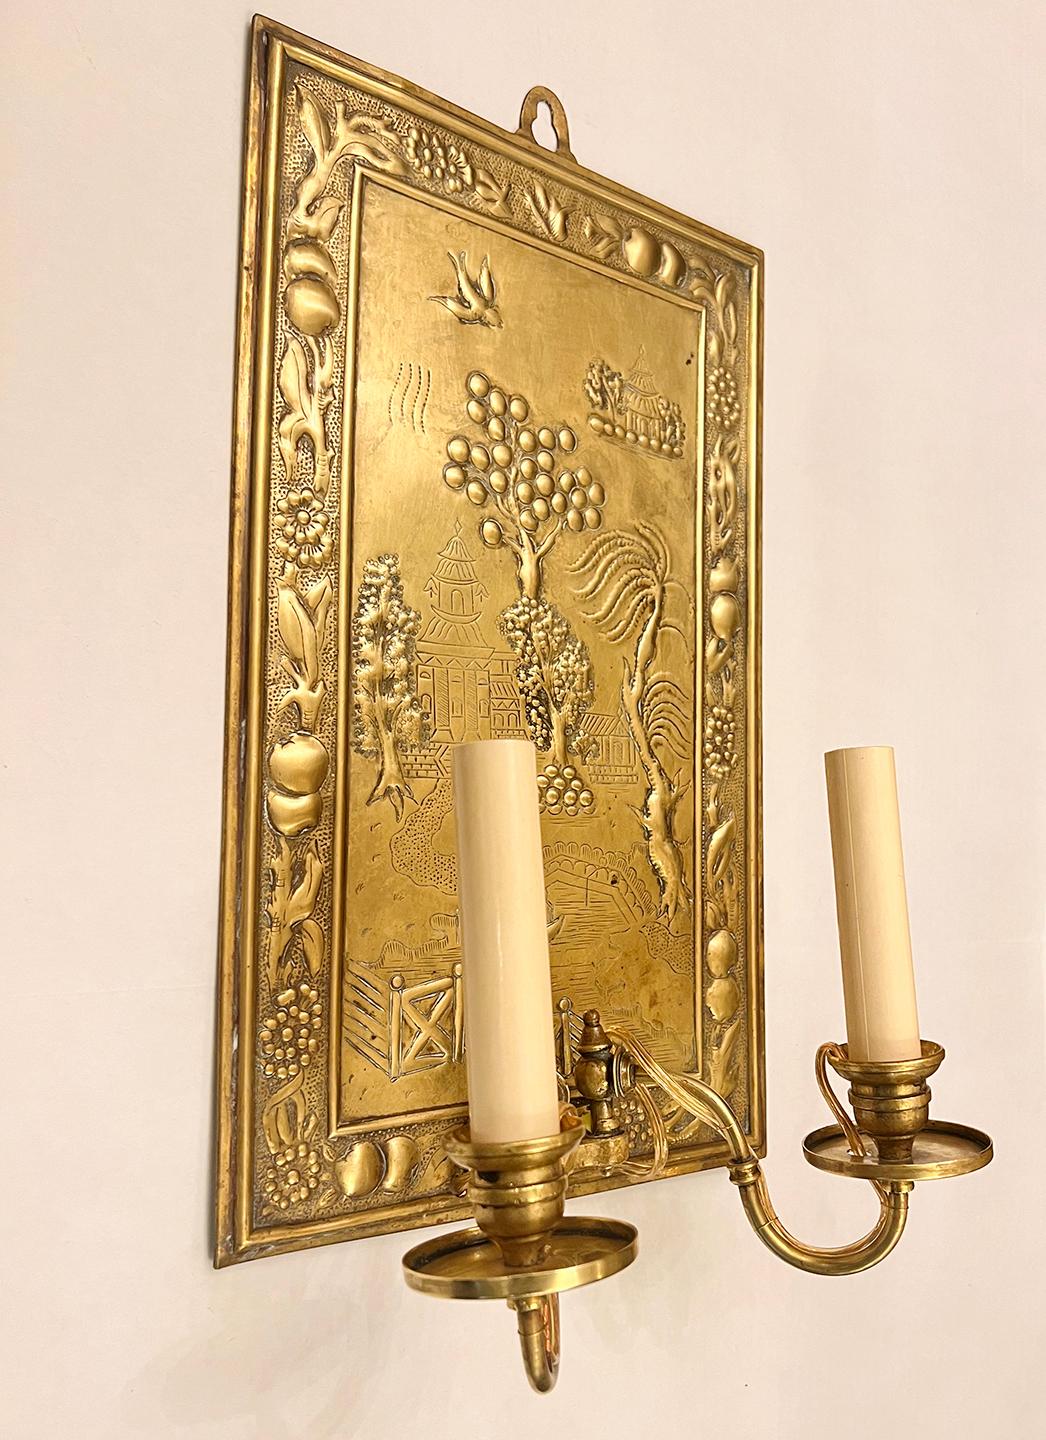 Pair of circa 1920's English repousse Chinoiserie sconces with 2 candelabra lights.

Measurements:
Height: 16.25